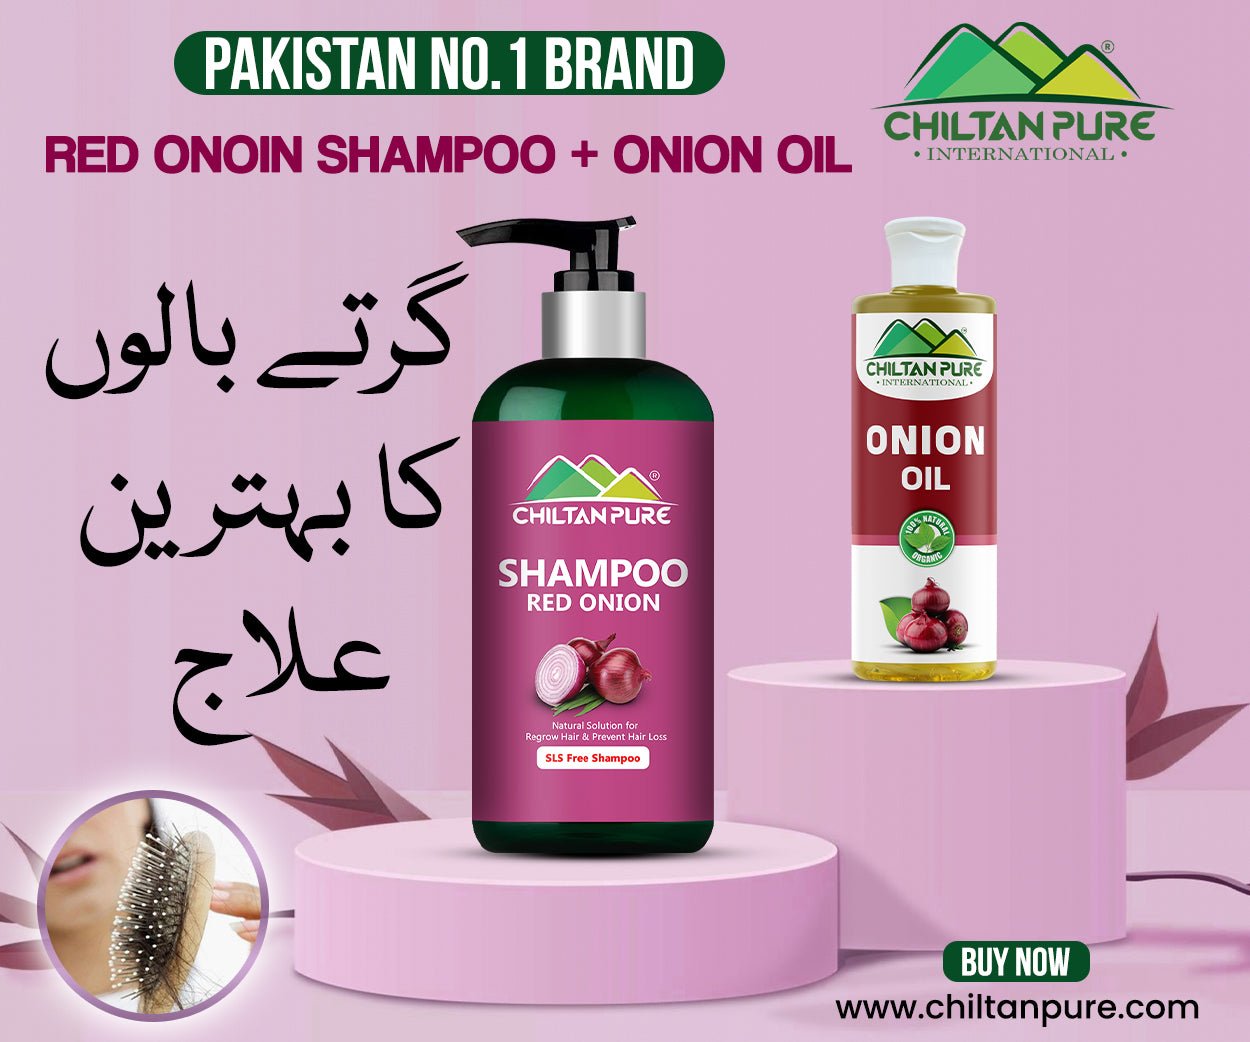 Red Onion Shampoo 🧅 Natural Solution for Regrow Hair & Prevent Hair Loss 100% Results - ChiltanPure